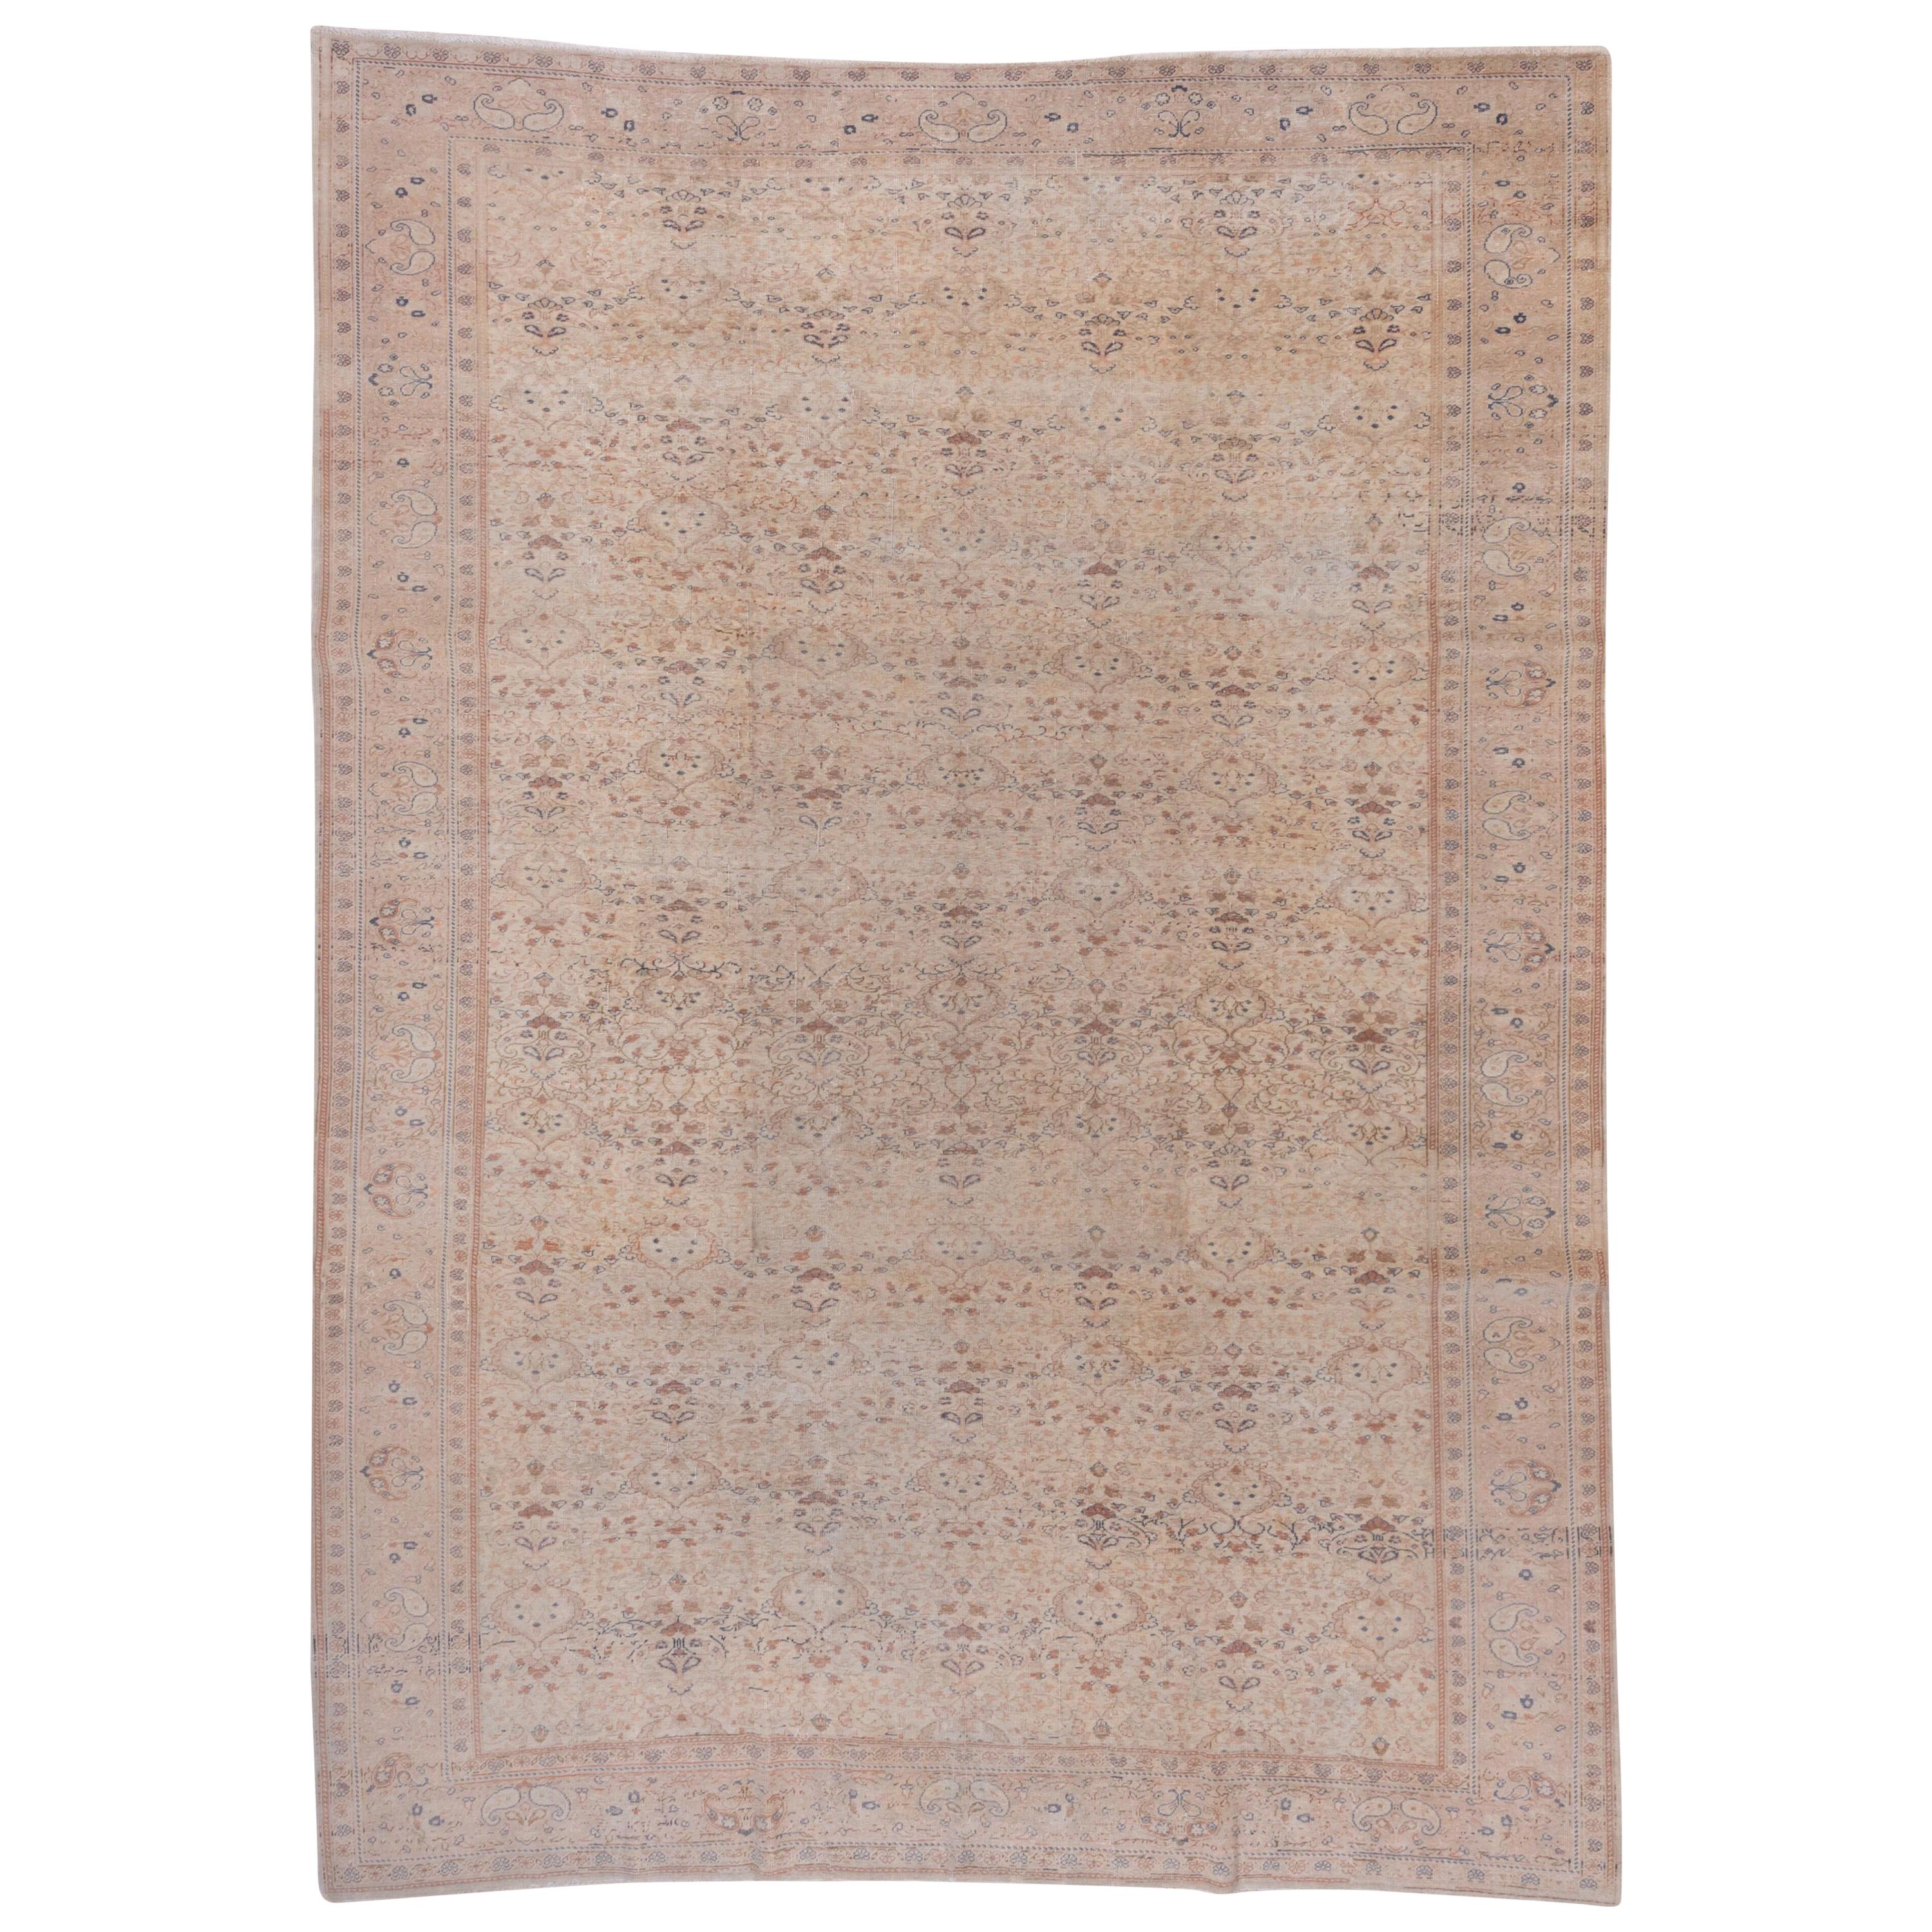 Soft Toned Turkish Oushak Rug, Blue Peach Accents, All-Over Field, circa 1930s